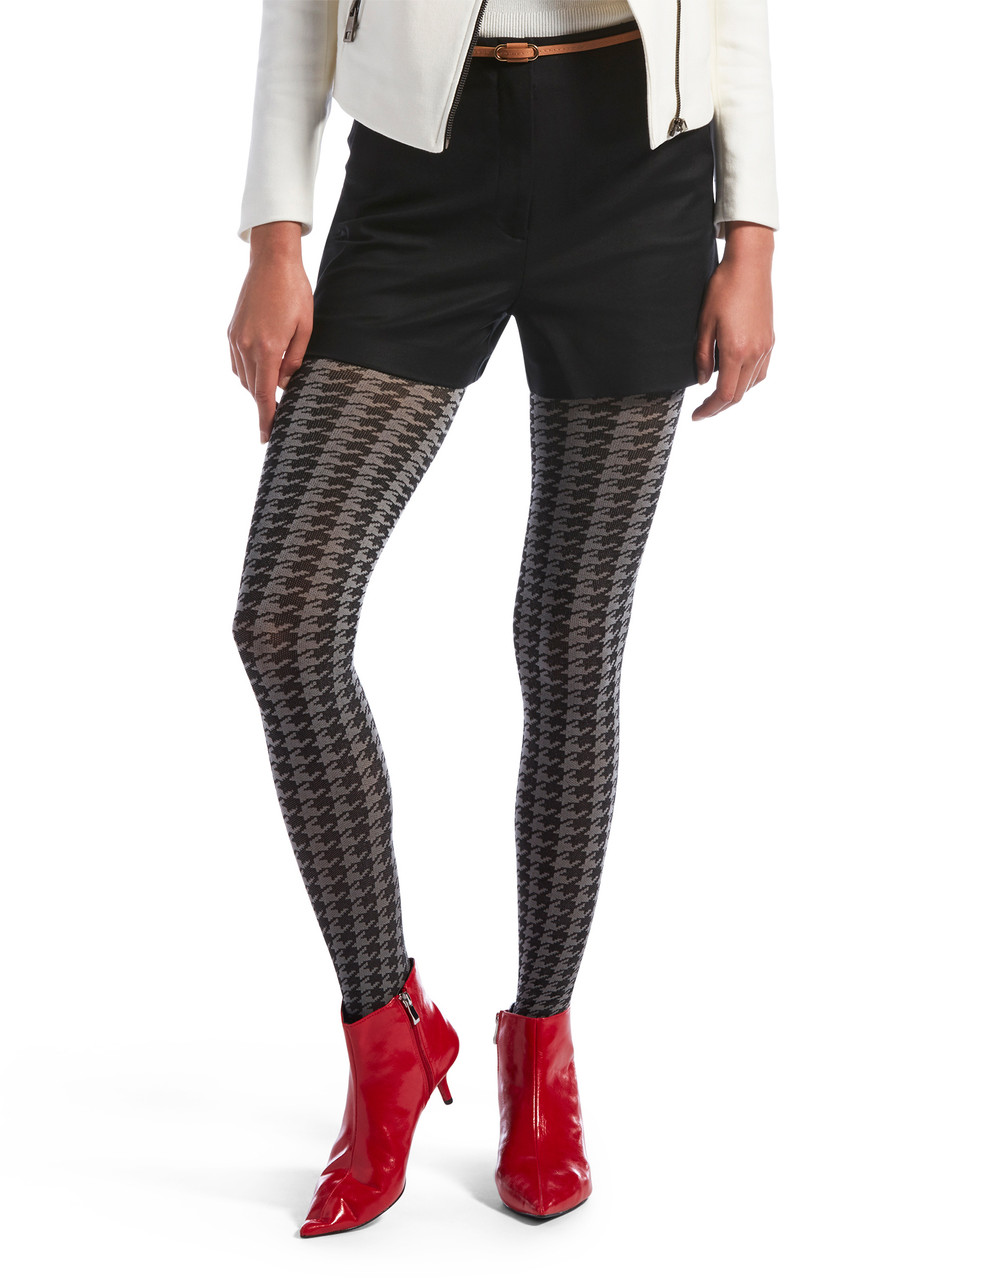 Red Plaid Footless Tights for Women